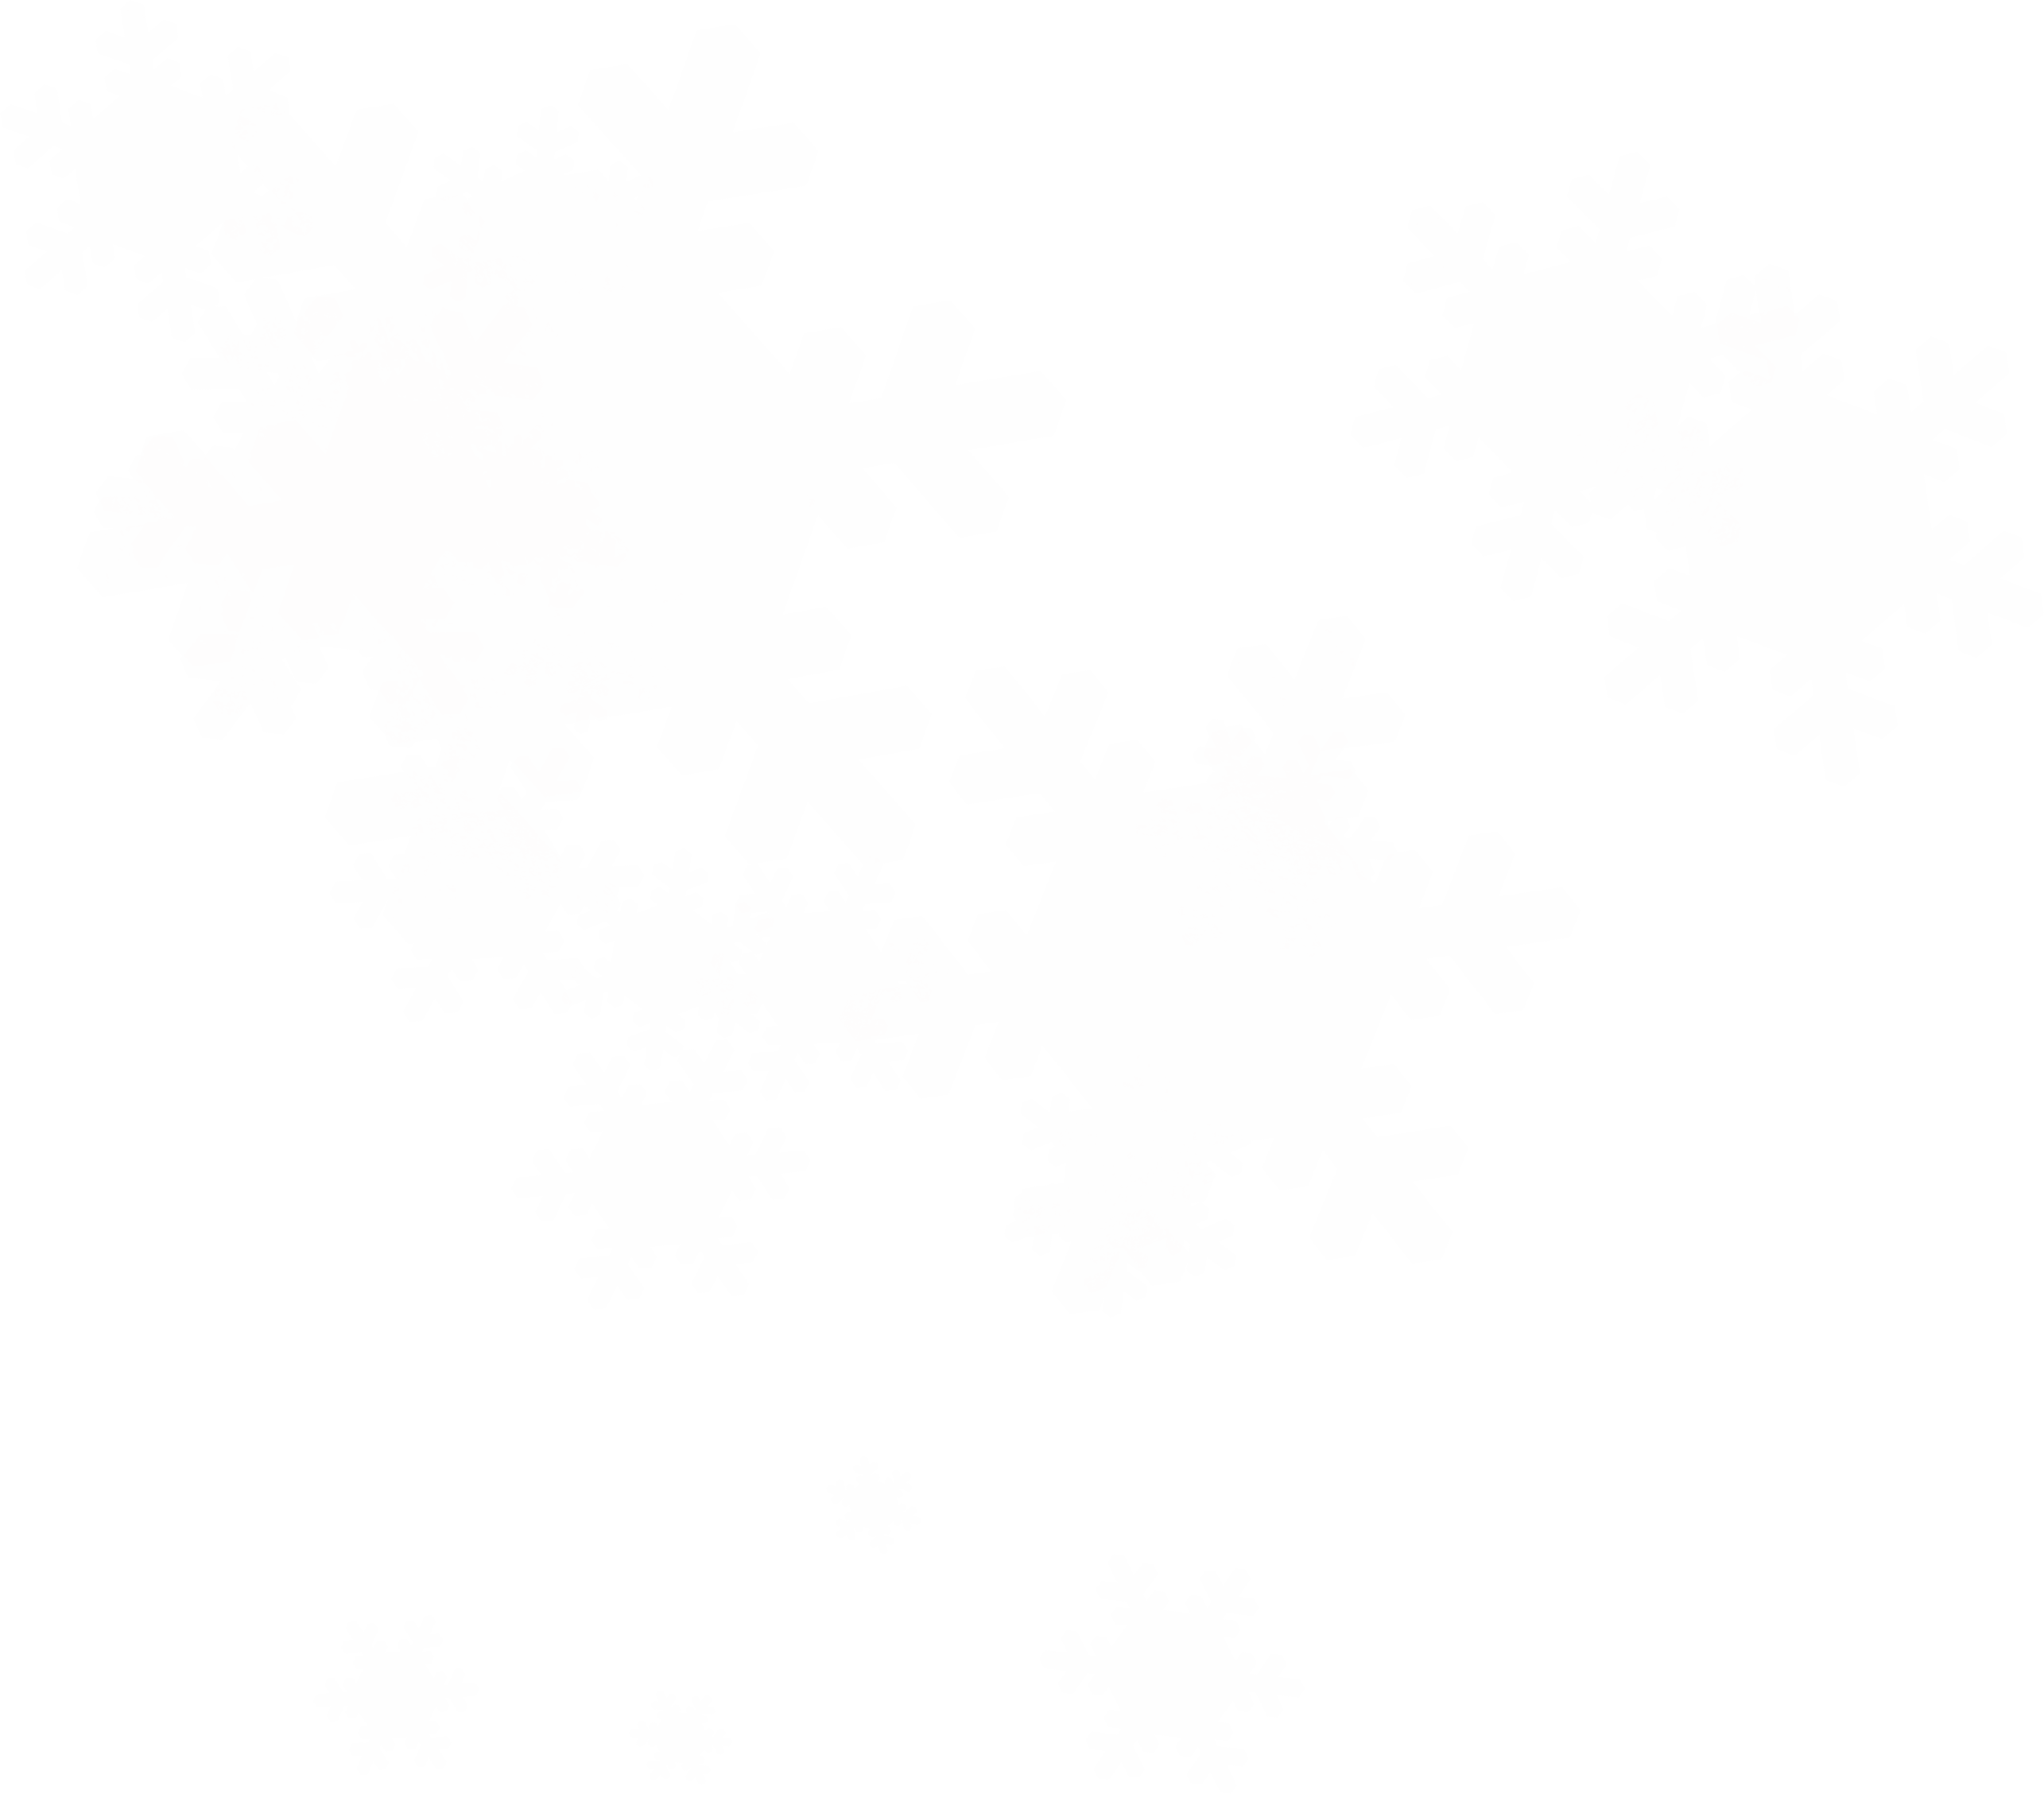 Snowflake Transparent PNG Pictures - Free Icons and PNG Backgrounds